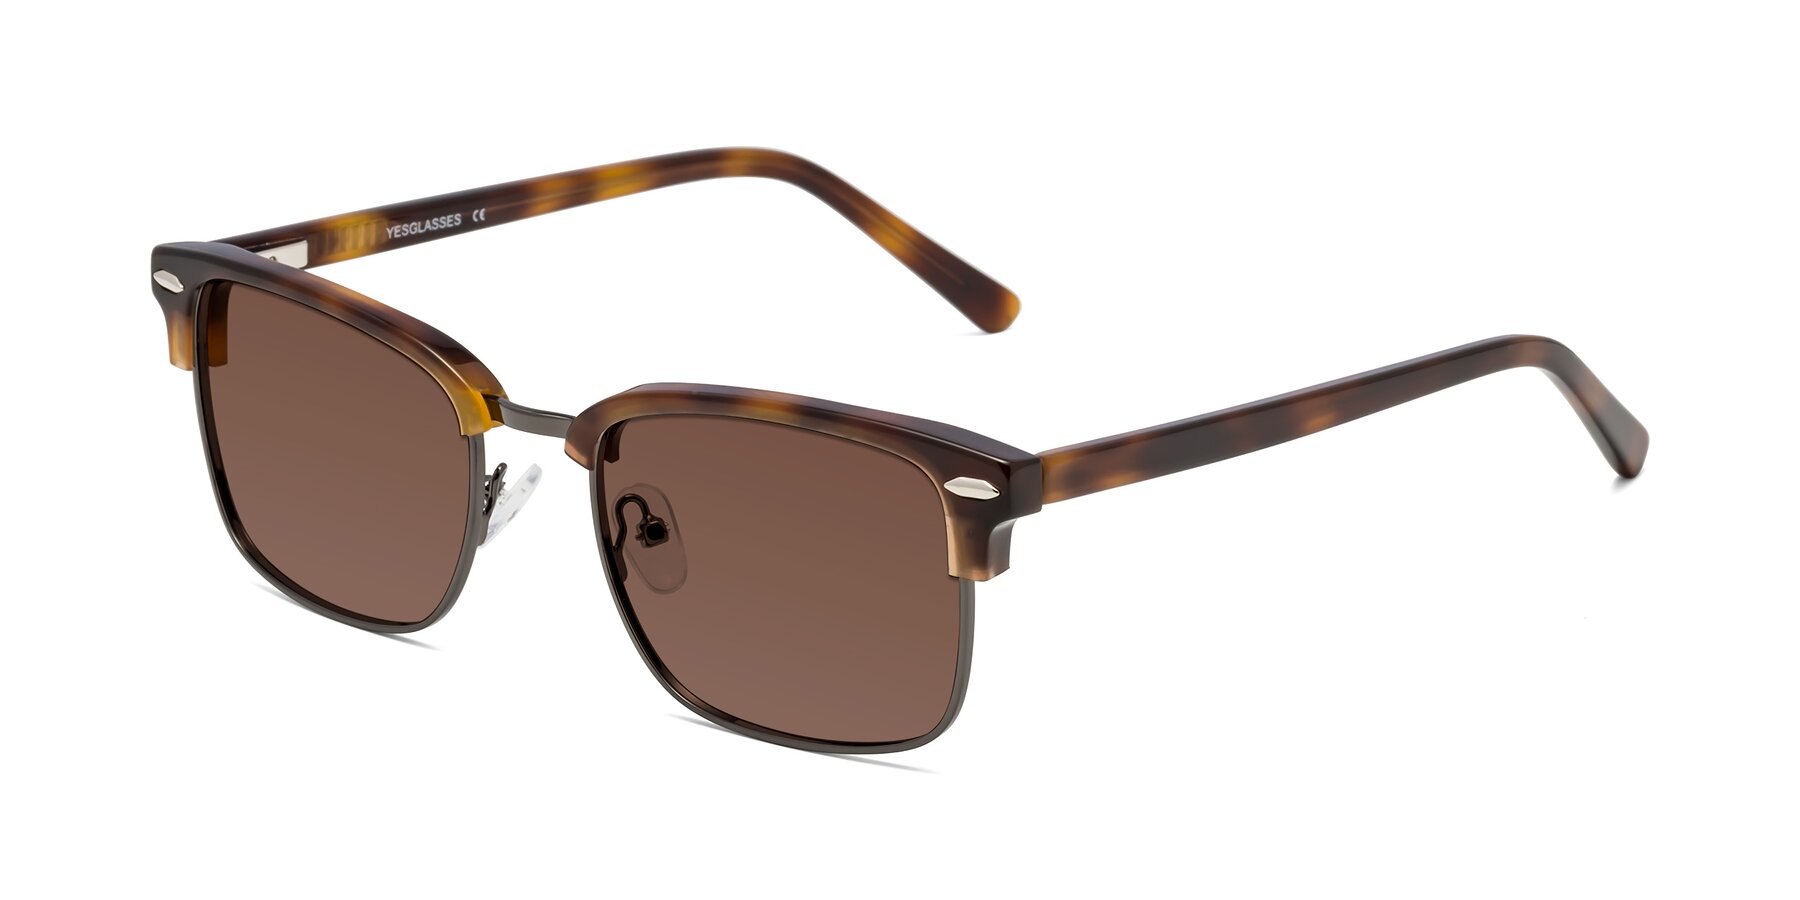 Angle of 17464 in Tortoise/ Gunmetal with Brown Tinted Lenses